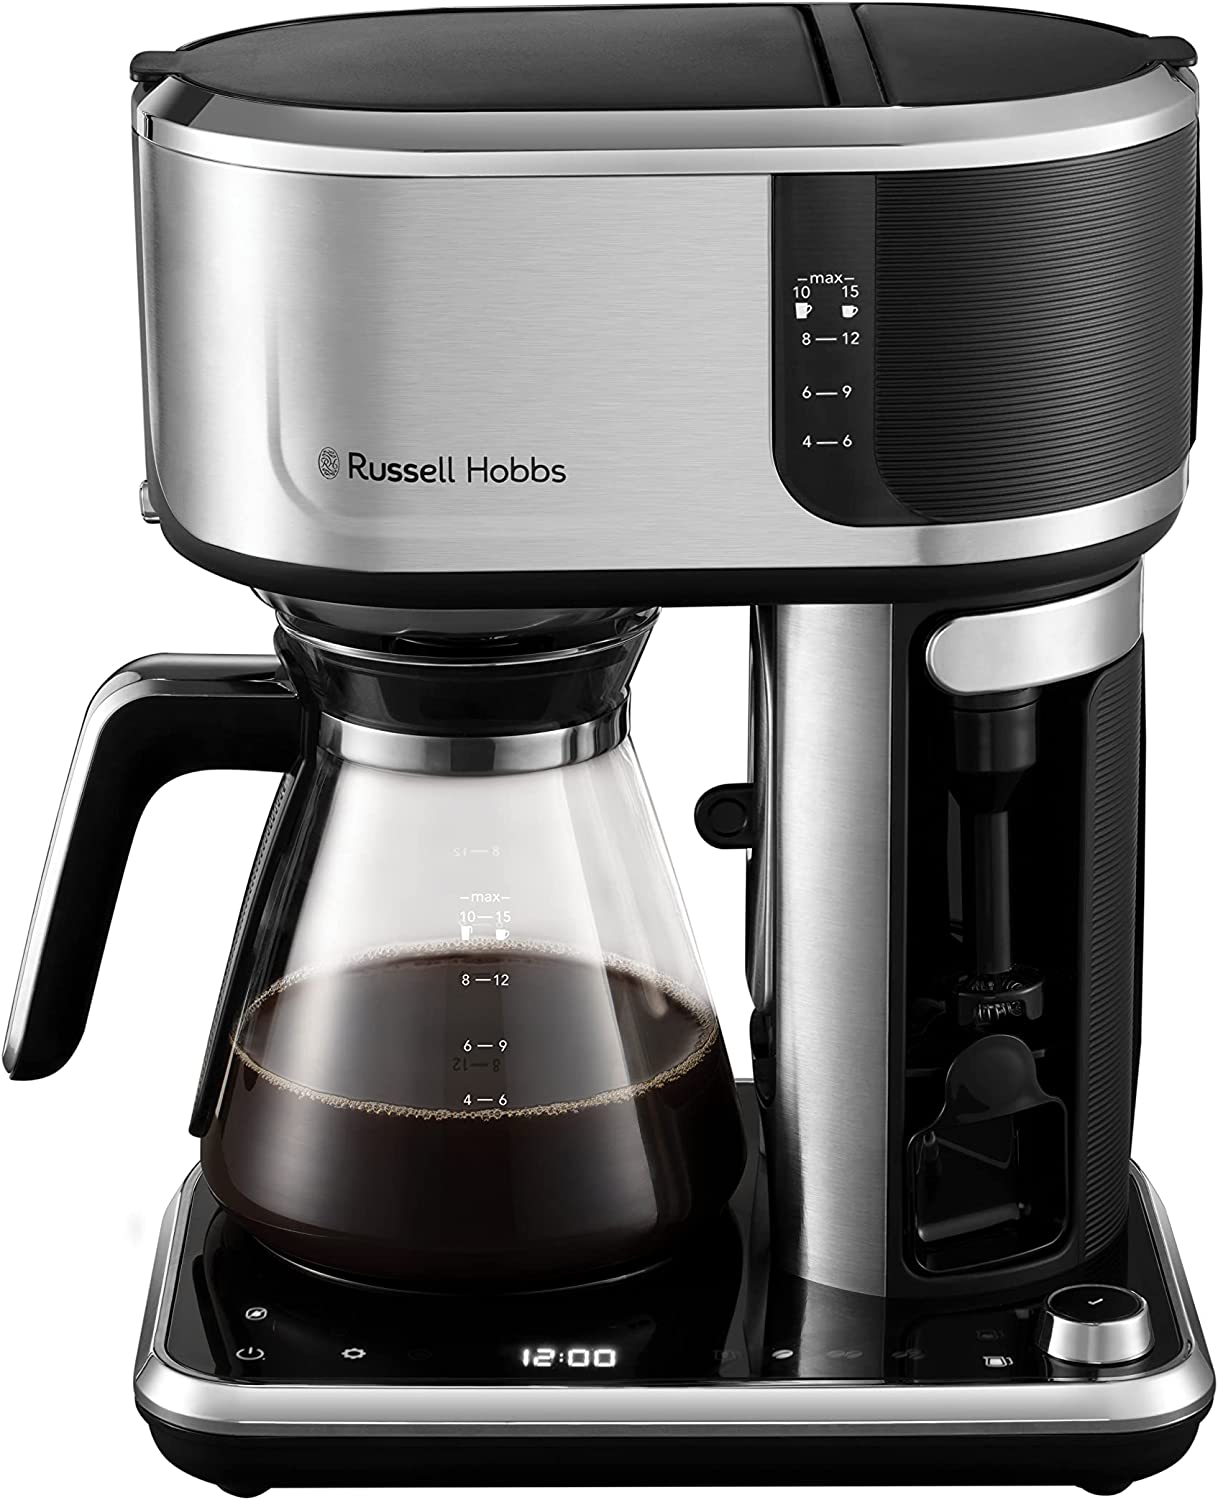 Russell Hobbs Coffee Machine [Barista: Brewing Strength Setting, Cold Brew Function, Milk Frother] Attentiv - Digital Touch Control Panel (Programmable Timer) Filter Coffee Machine 26230-56